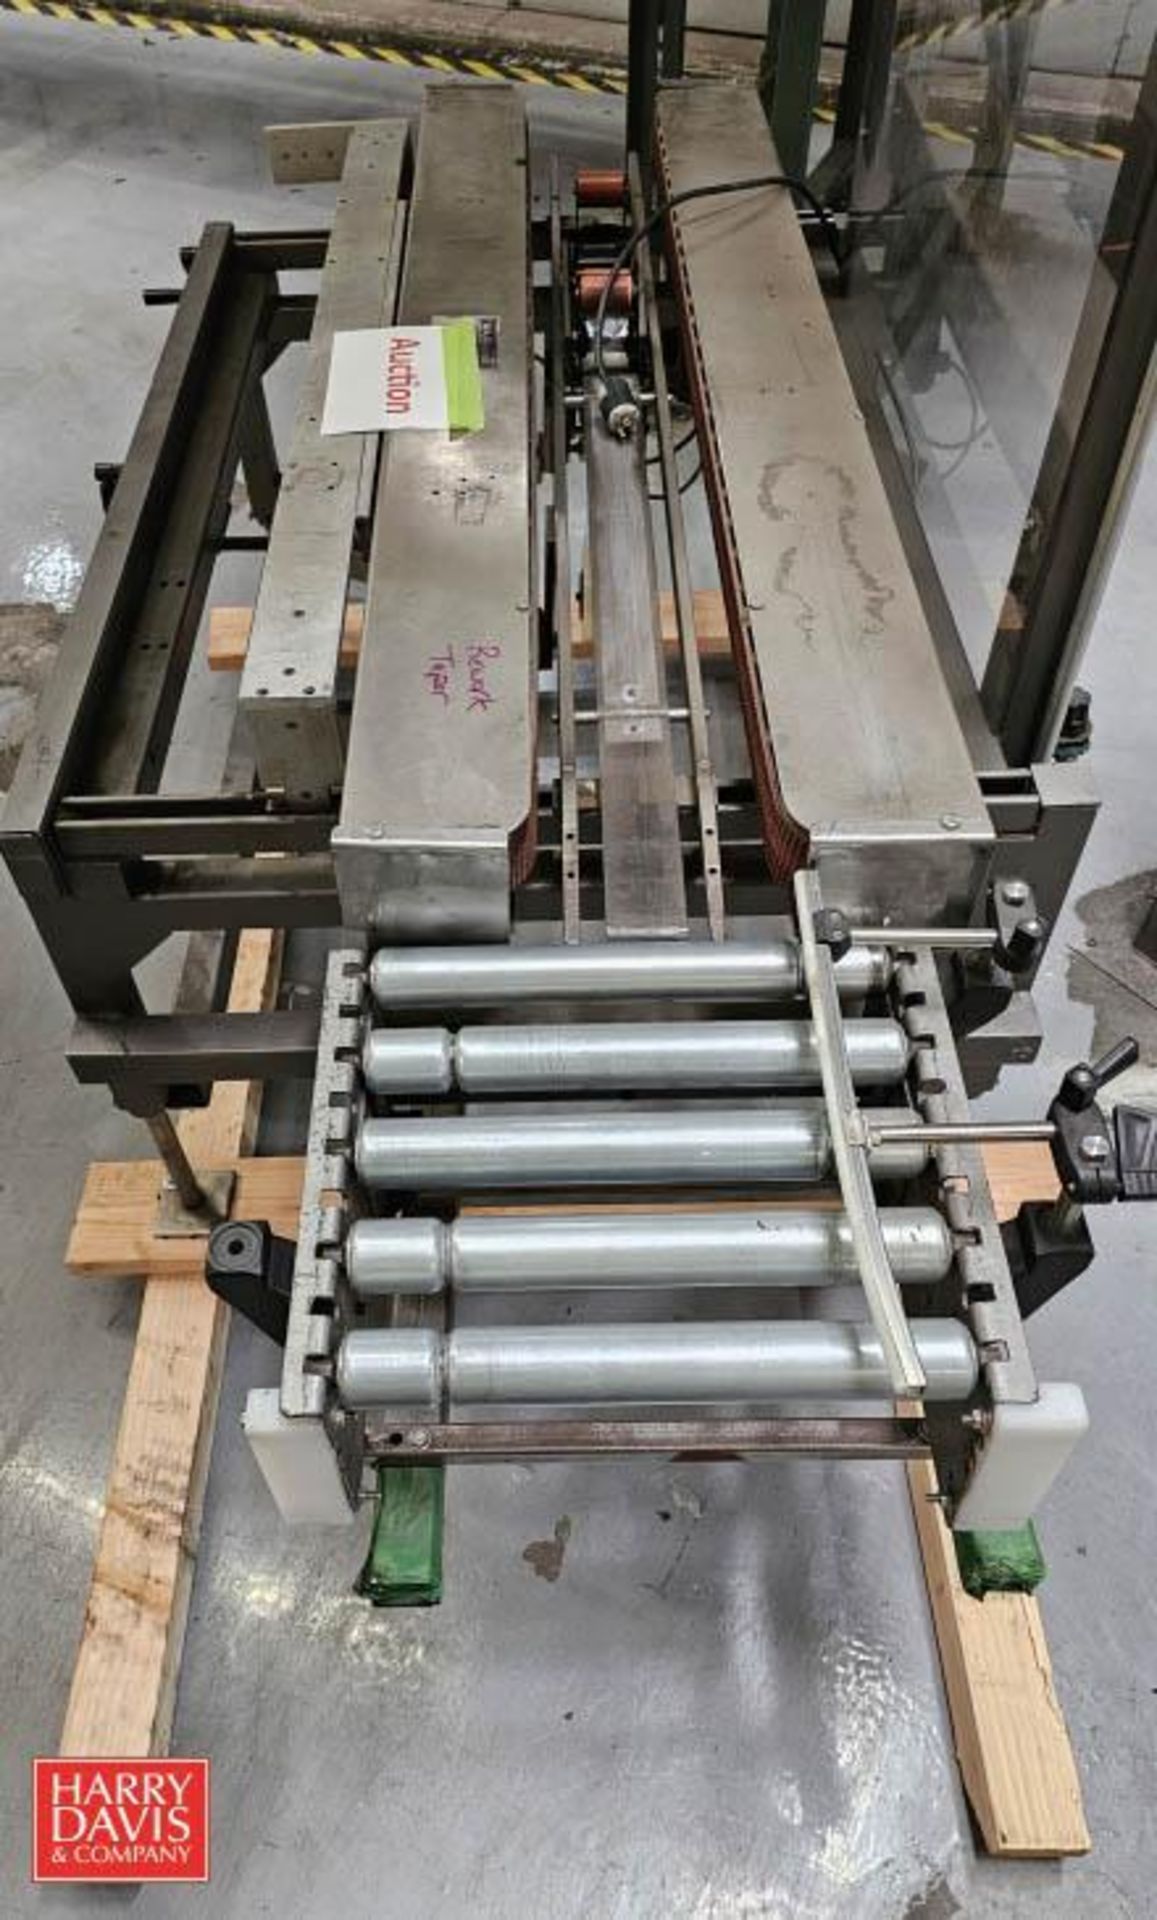 Bottom Cale Sealer with Roller Conveyor (Location: Carson, California) - Rigging Fee: $150 - Image 2 of 2